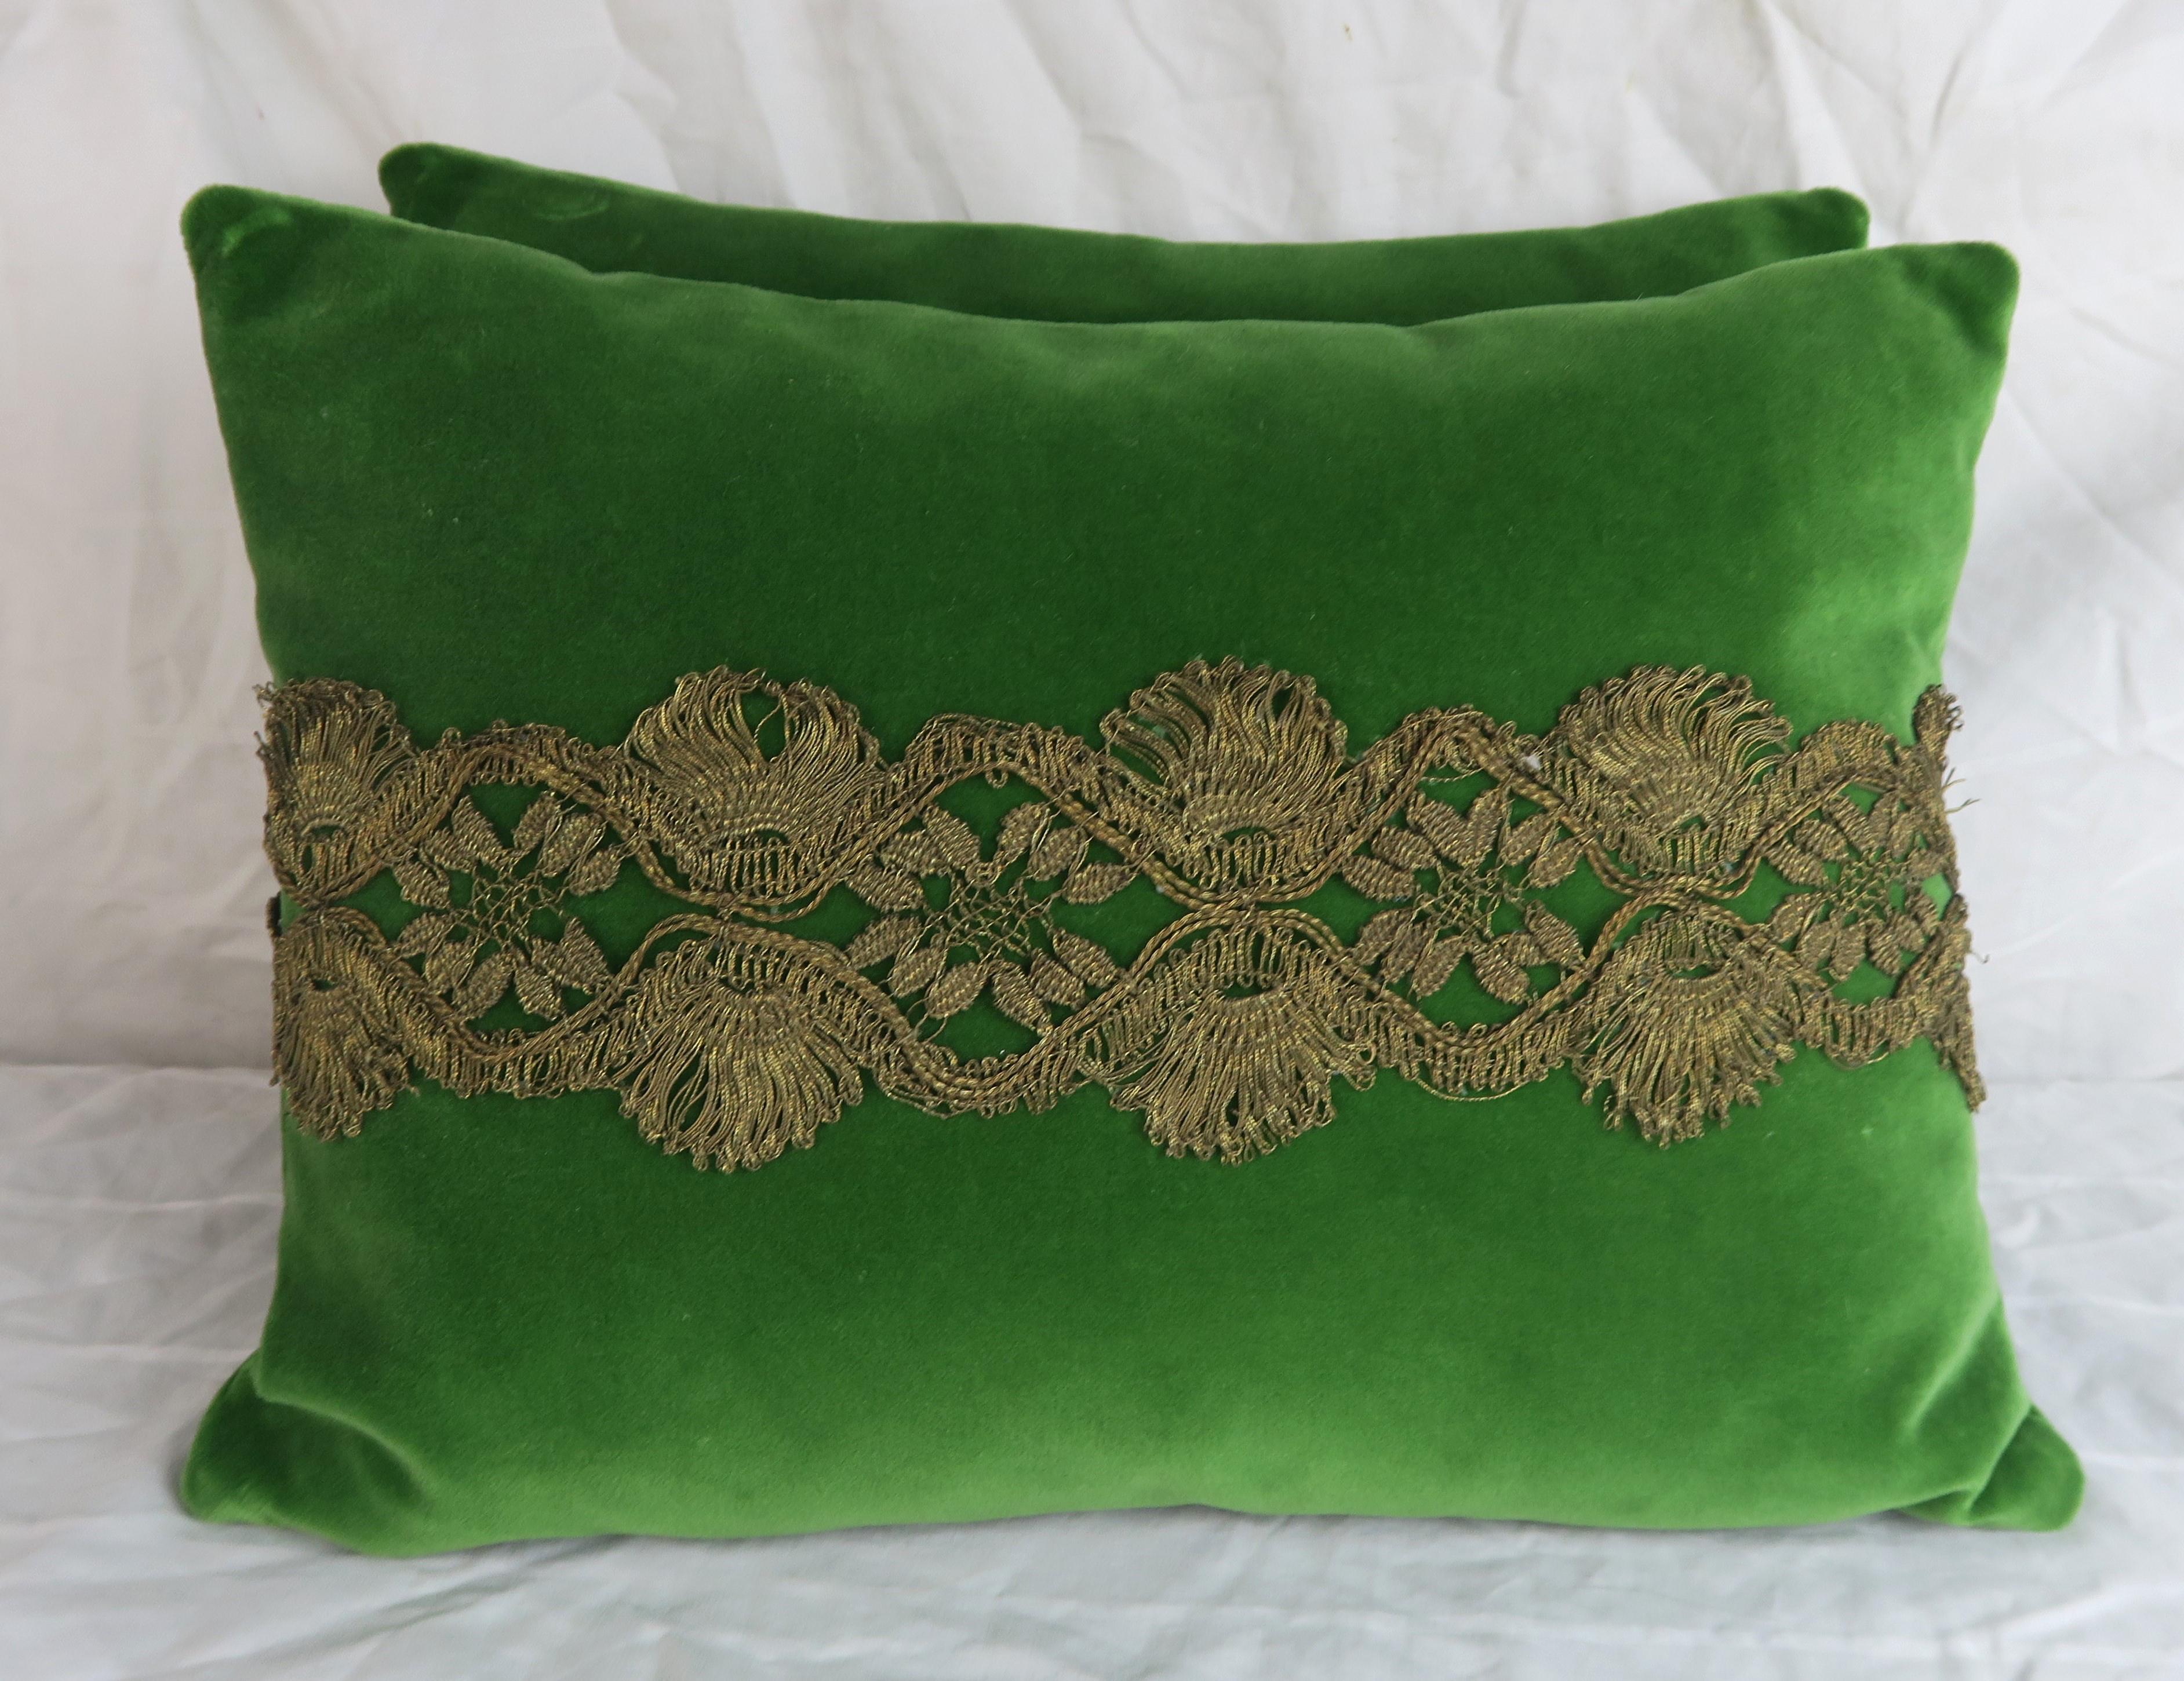 Pair of French metallic lace appliqued green silk velvet pillows. Down inserts, zipper closures.